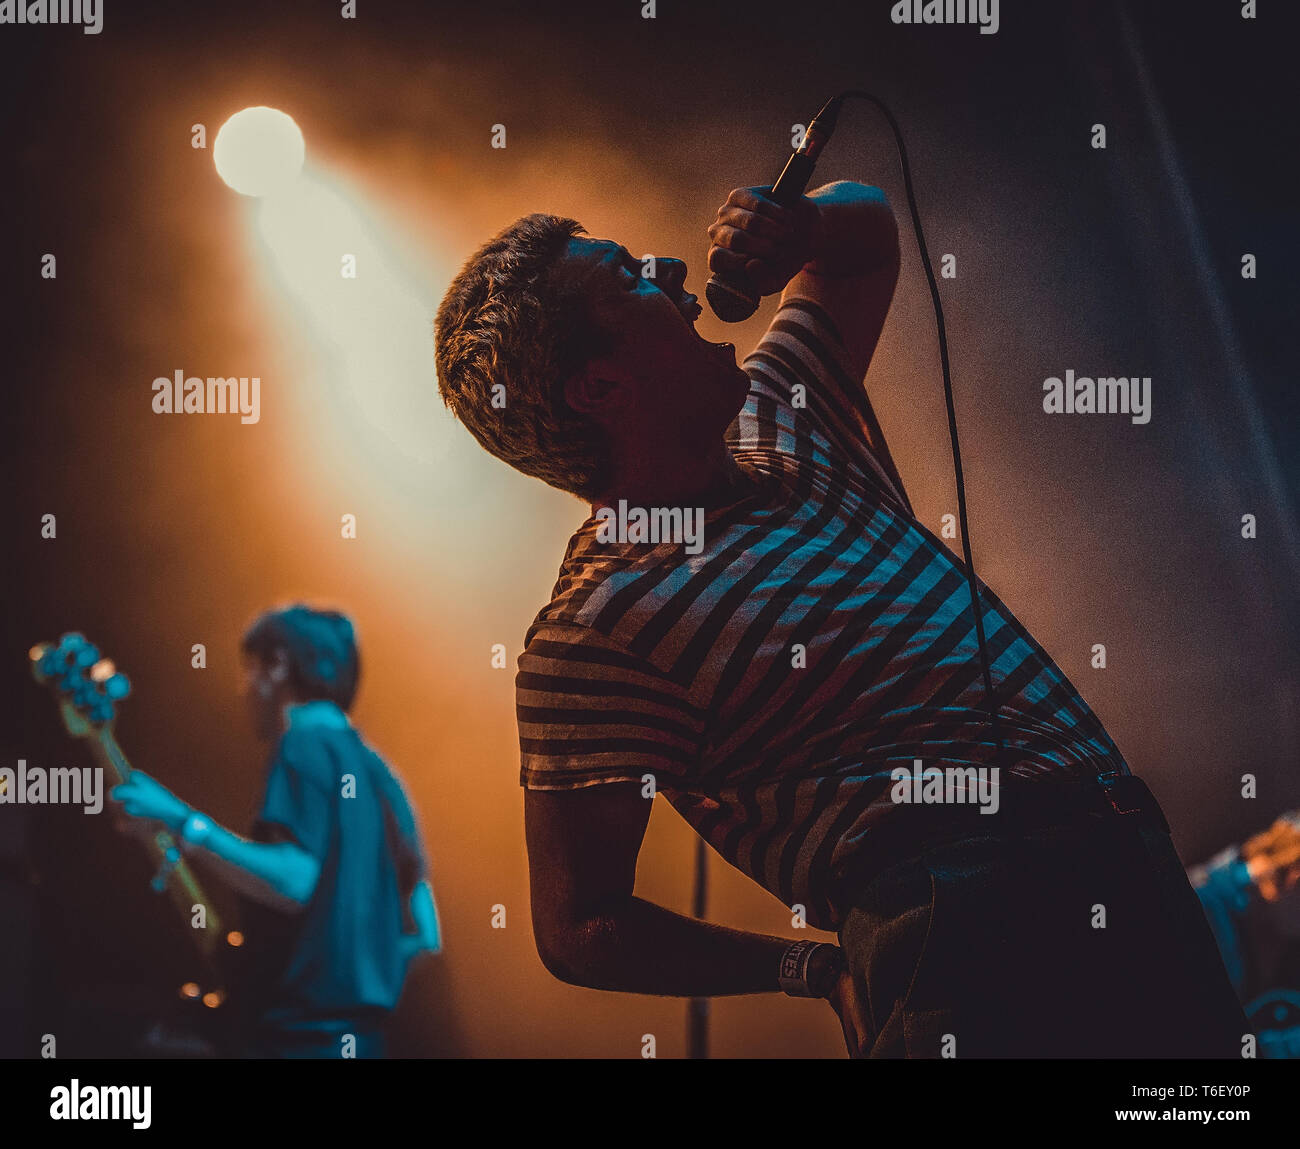 BENICASSIM, SPAIN - JUL 22: Shame (band) perform in concert at FIB Festival on July 22, 2018 in Benicassim, Spain. Stock Photo